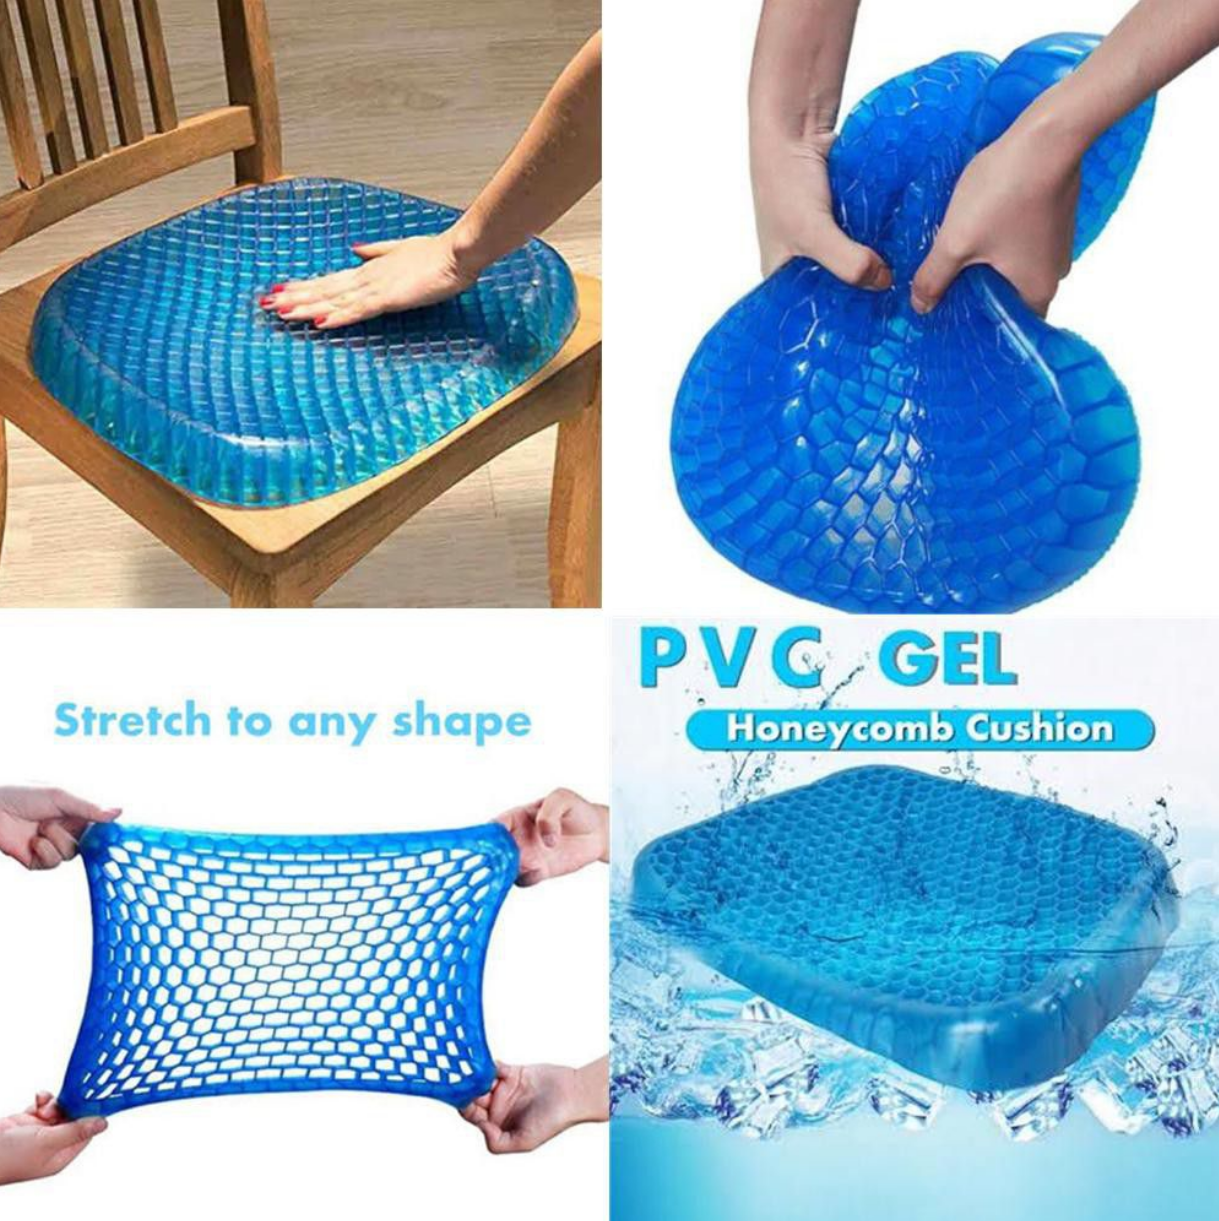 EGG SITTER HONEYCOMB CUSHION - household items - by owner